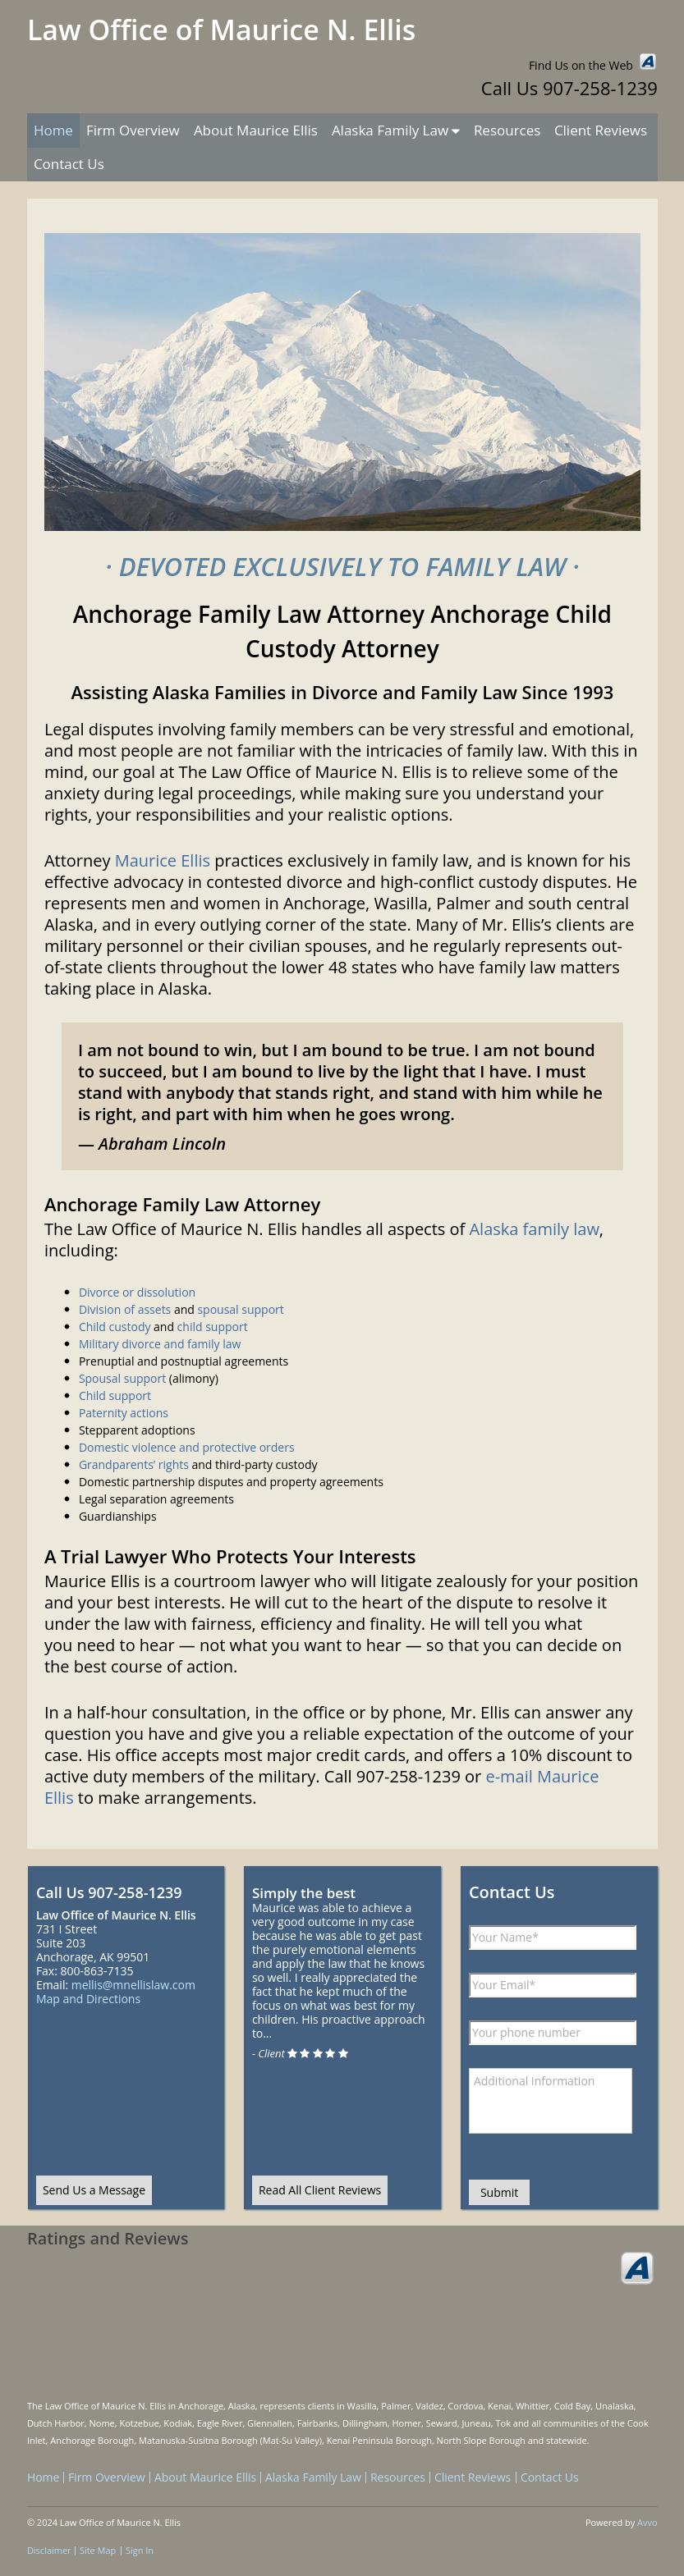 Law Office of Maurice N. Ellis - Anchorage AK Lawyers